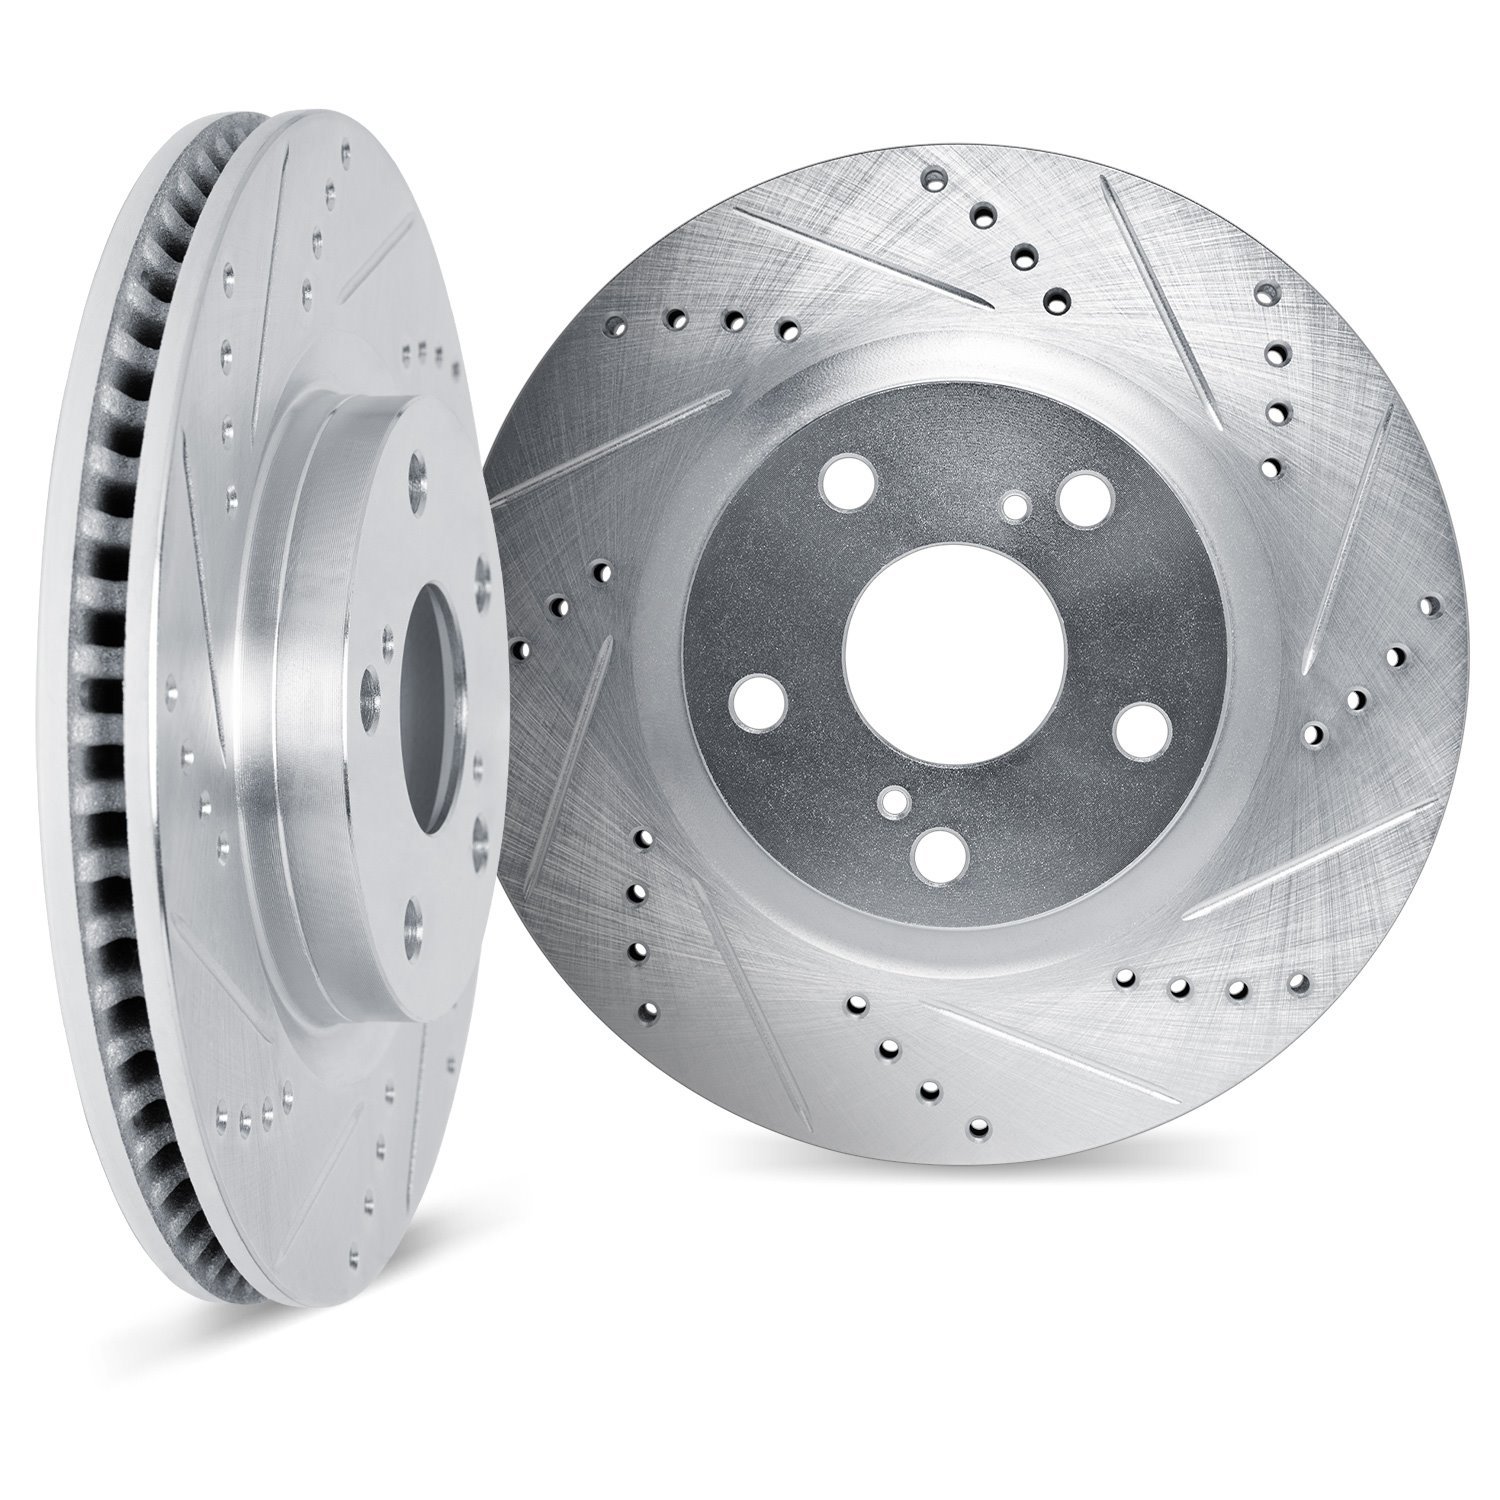 7002-58001 Drilled/Slotted Brake Rotors [Silver], Fits Select Acura/Honda, Position: Front